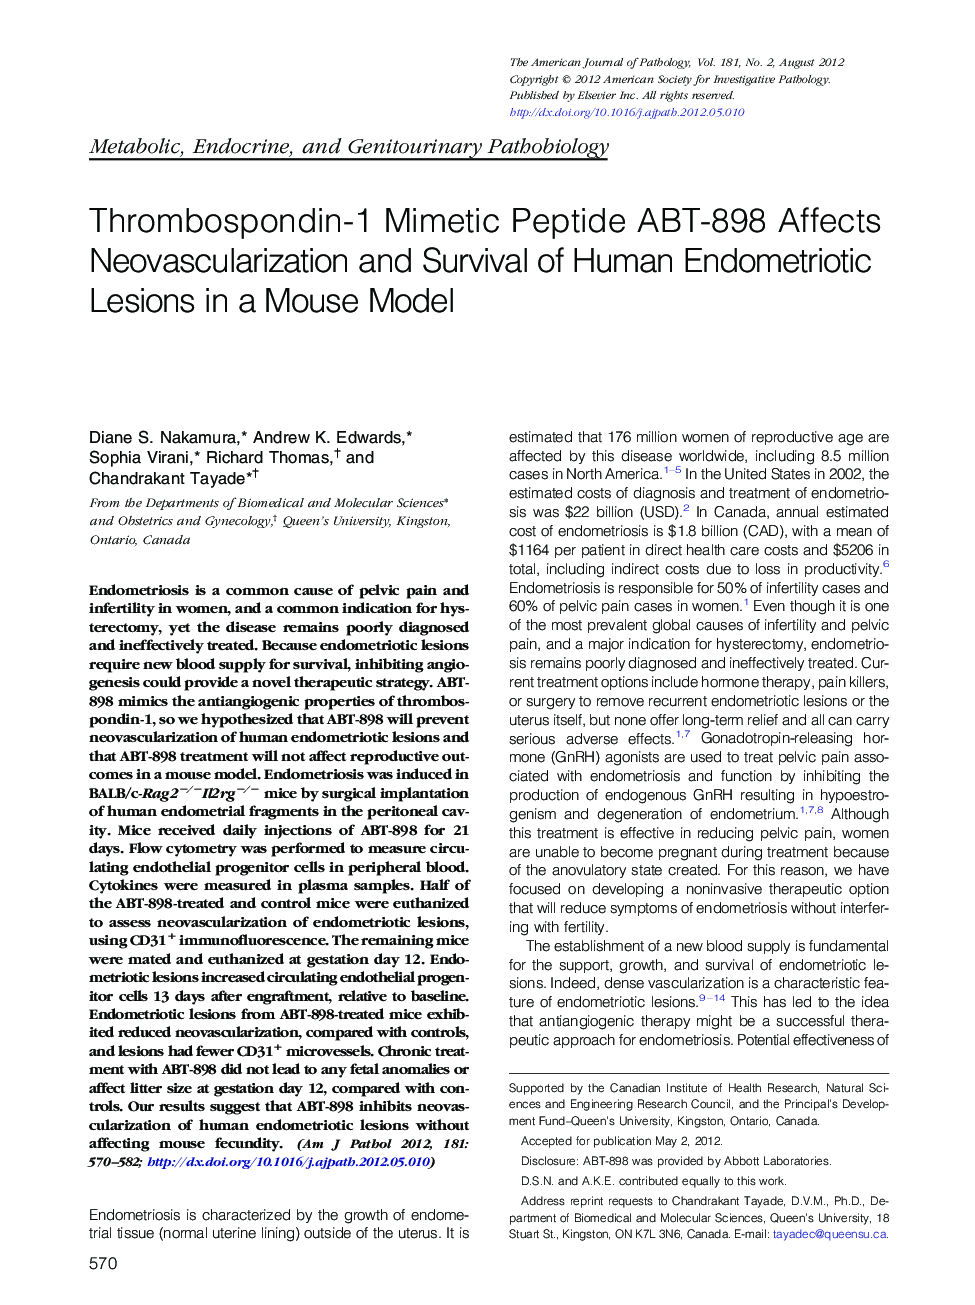 Thrombospondin-1 Mimetic Peptide ABT-898 Affects Neovascularization and Survival of Human Endometriotic Lesions in a Mouse Model